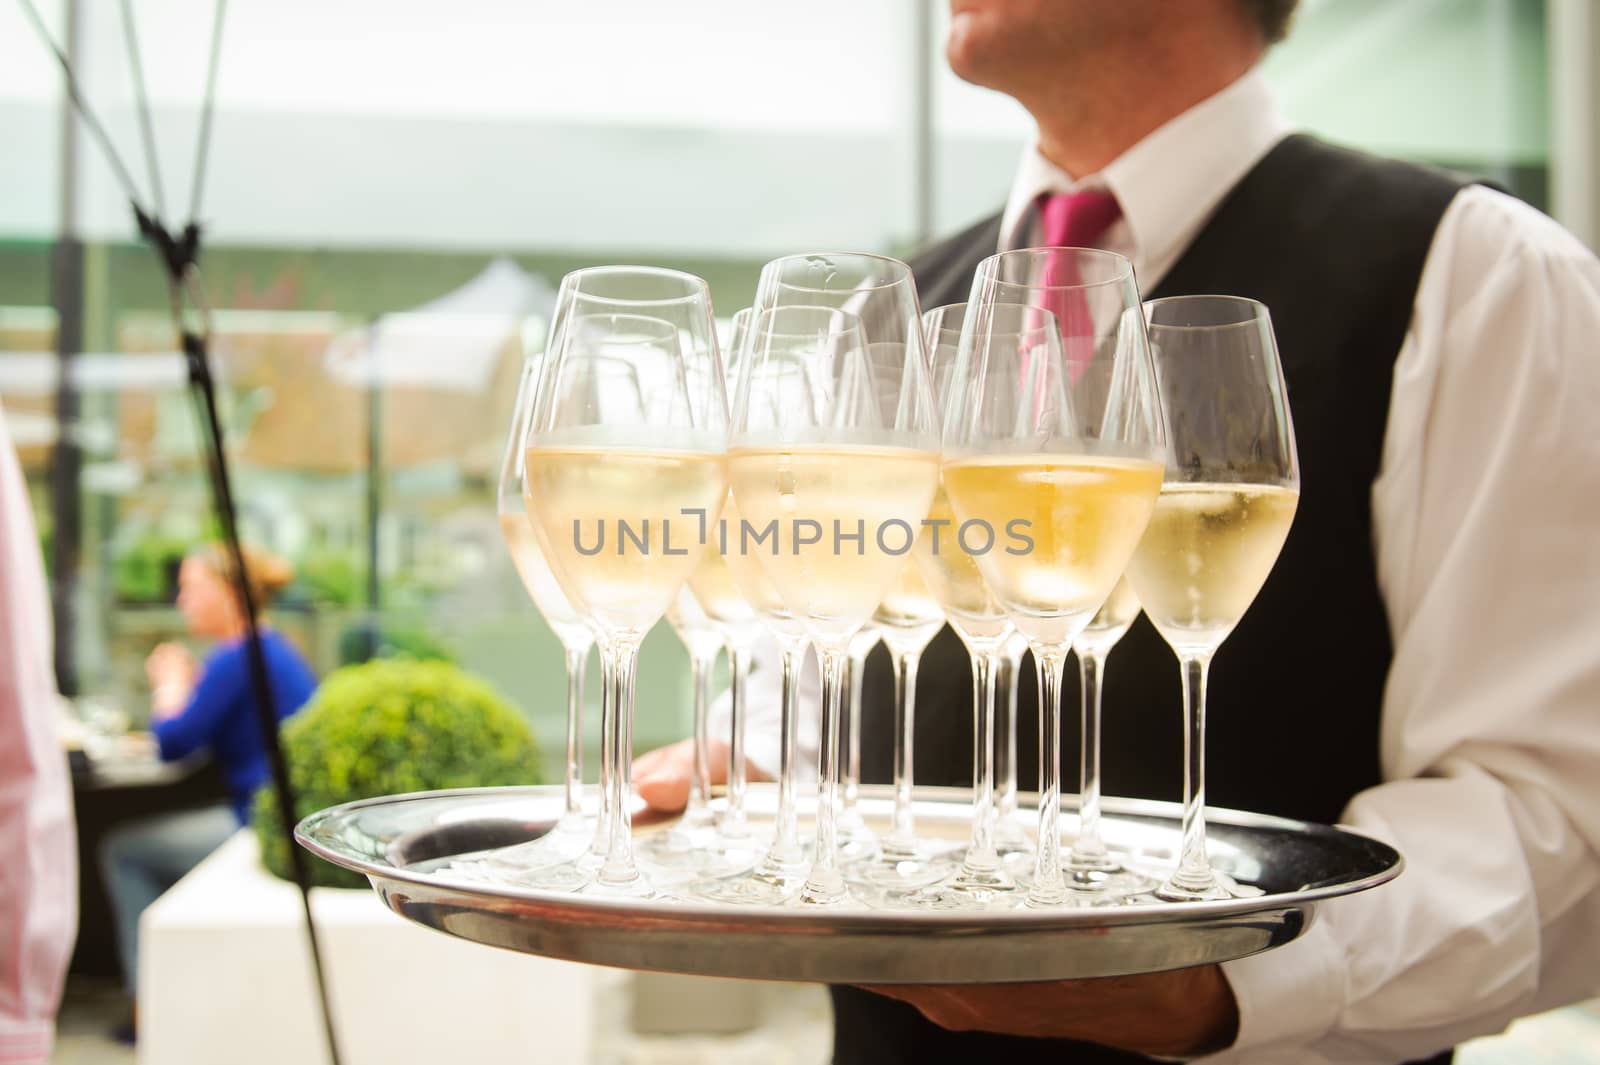 Waiter waiting with a plate full of glasses Champagne